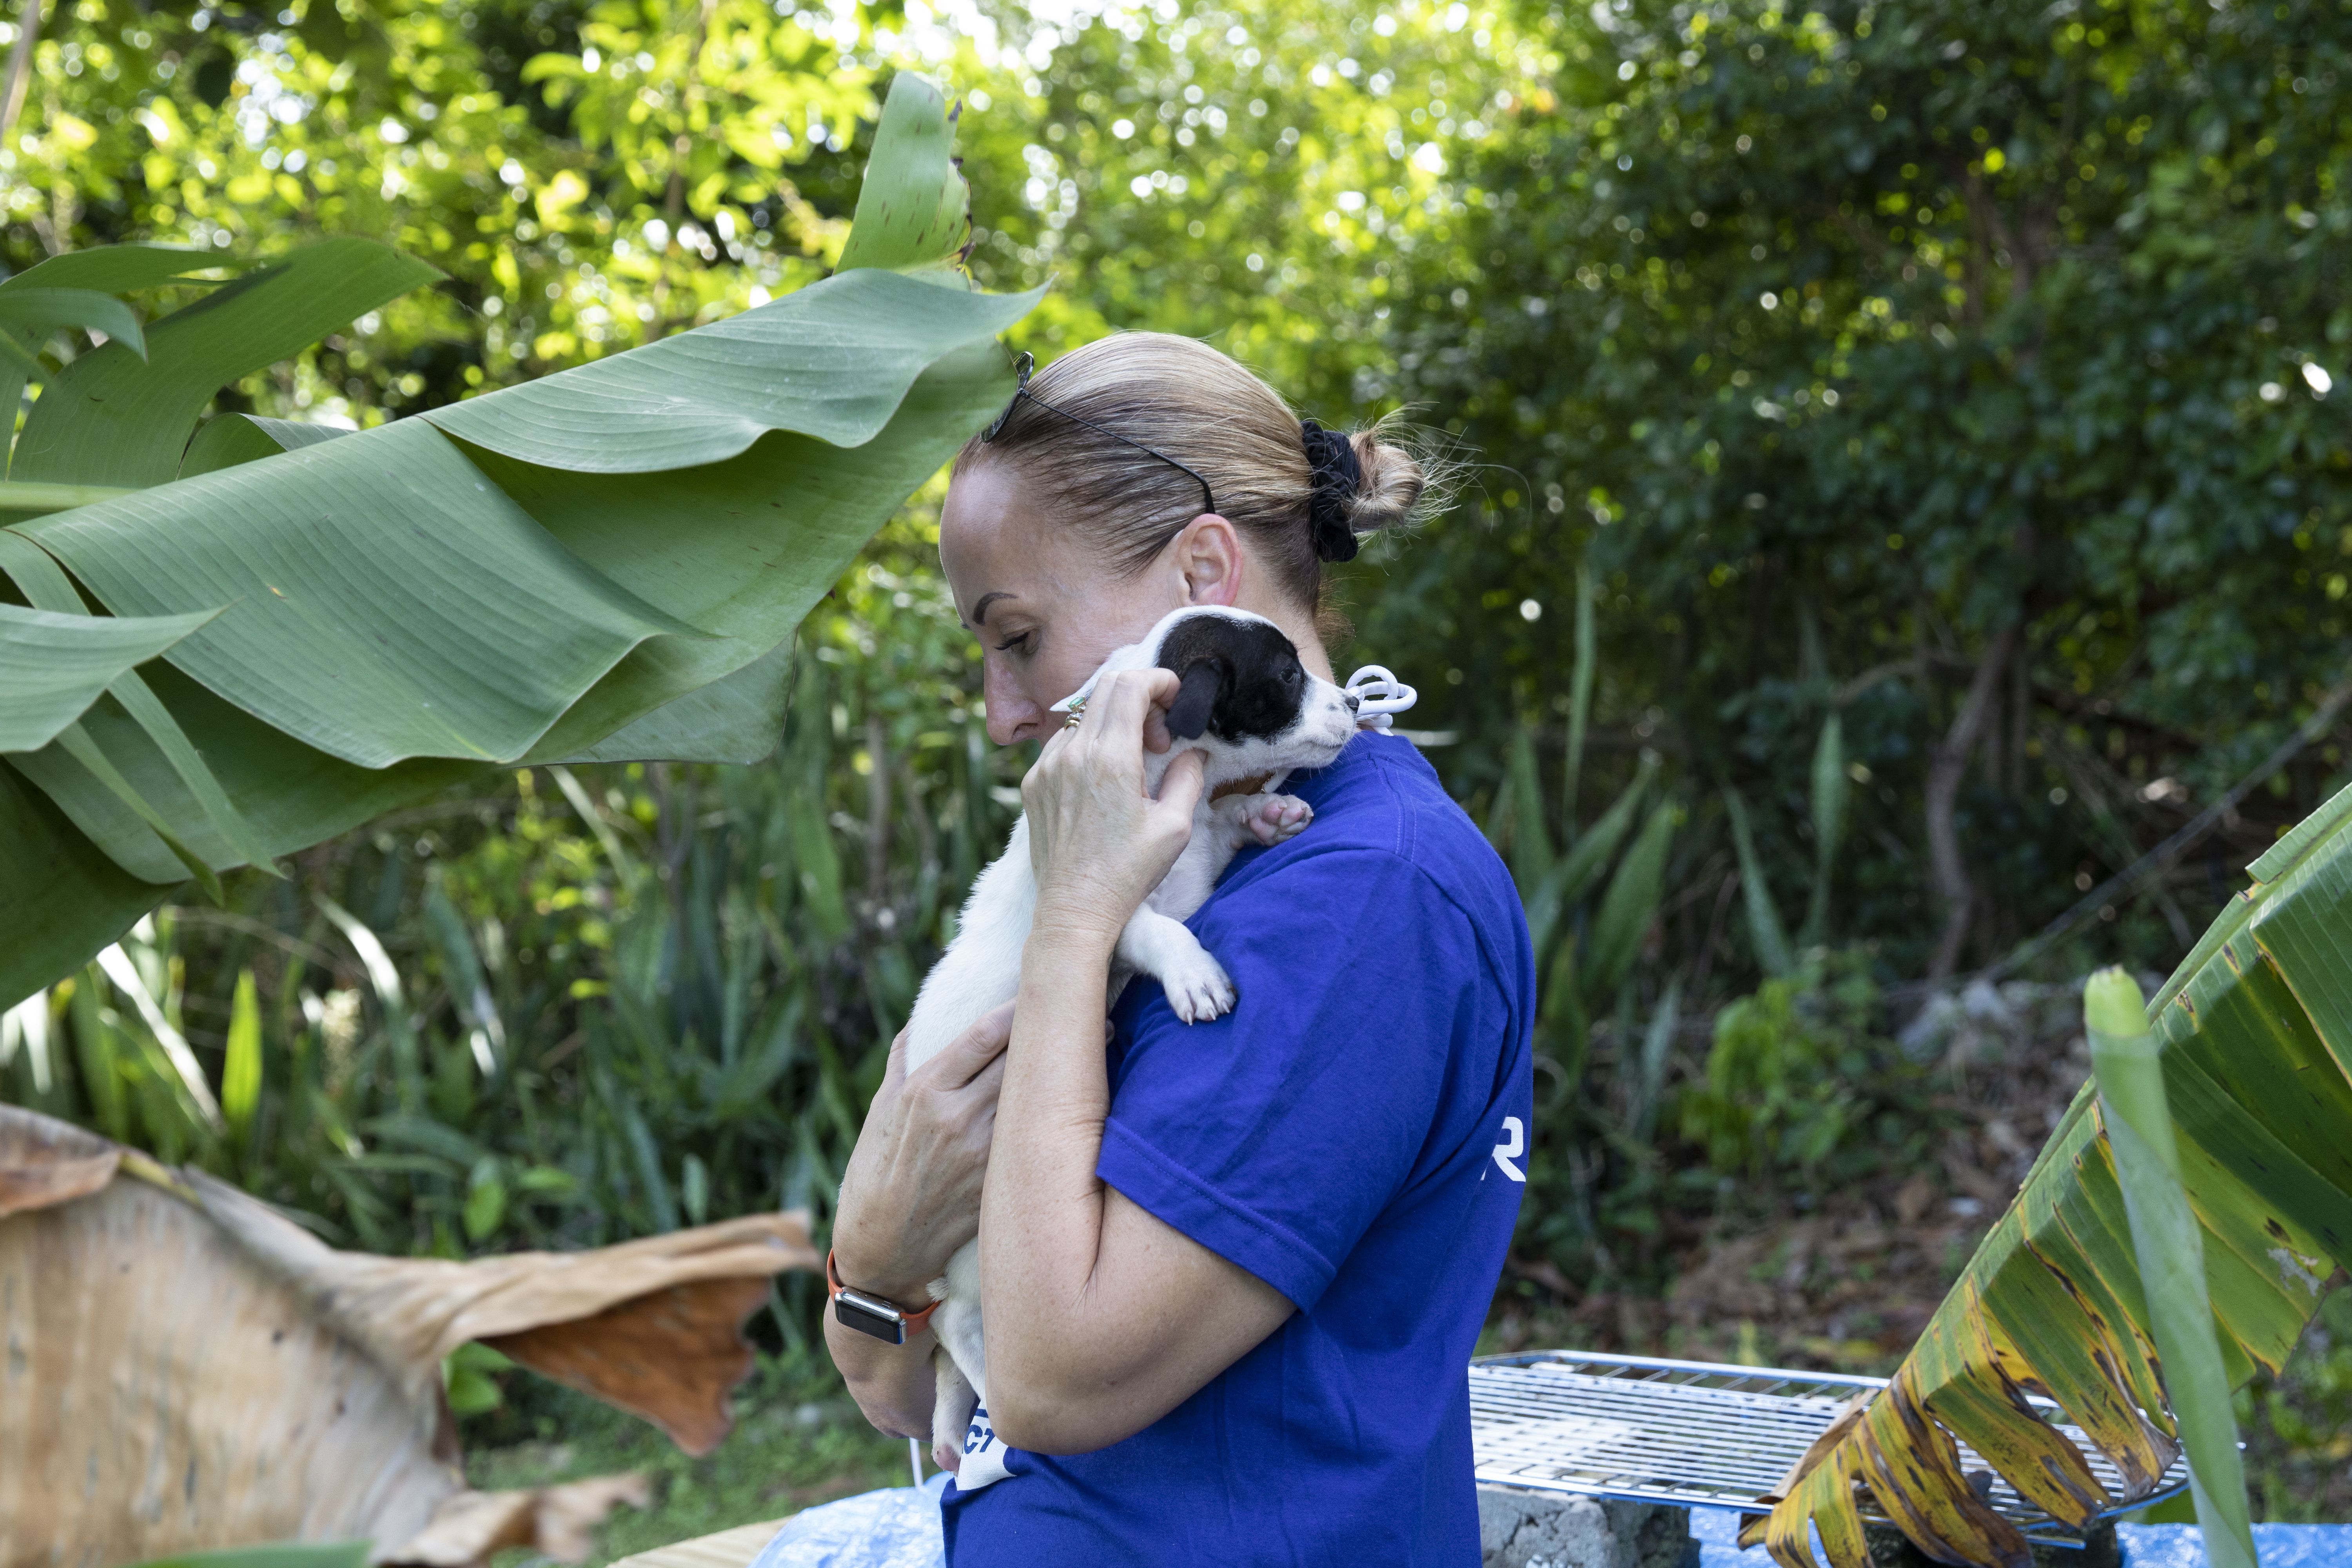 Chrissy Beckles, founder of The SATO Project, picks up one of the rescued puppies. She notes how its black eye reminds her of her dog Boom Boom. Image by Jamie Holt. United States, 2019.
